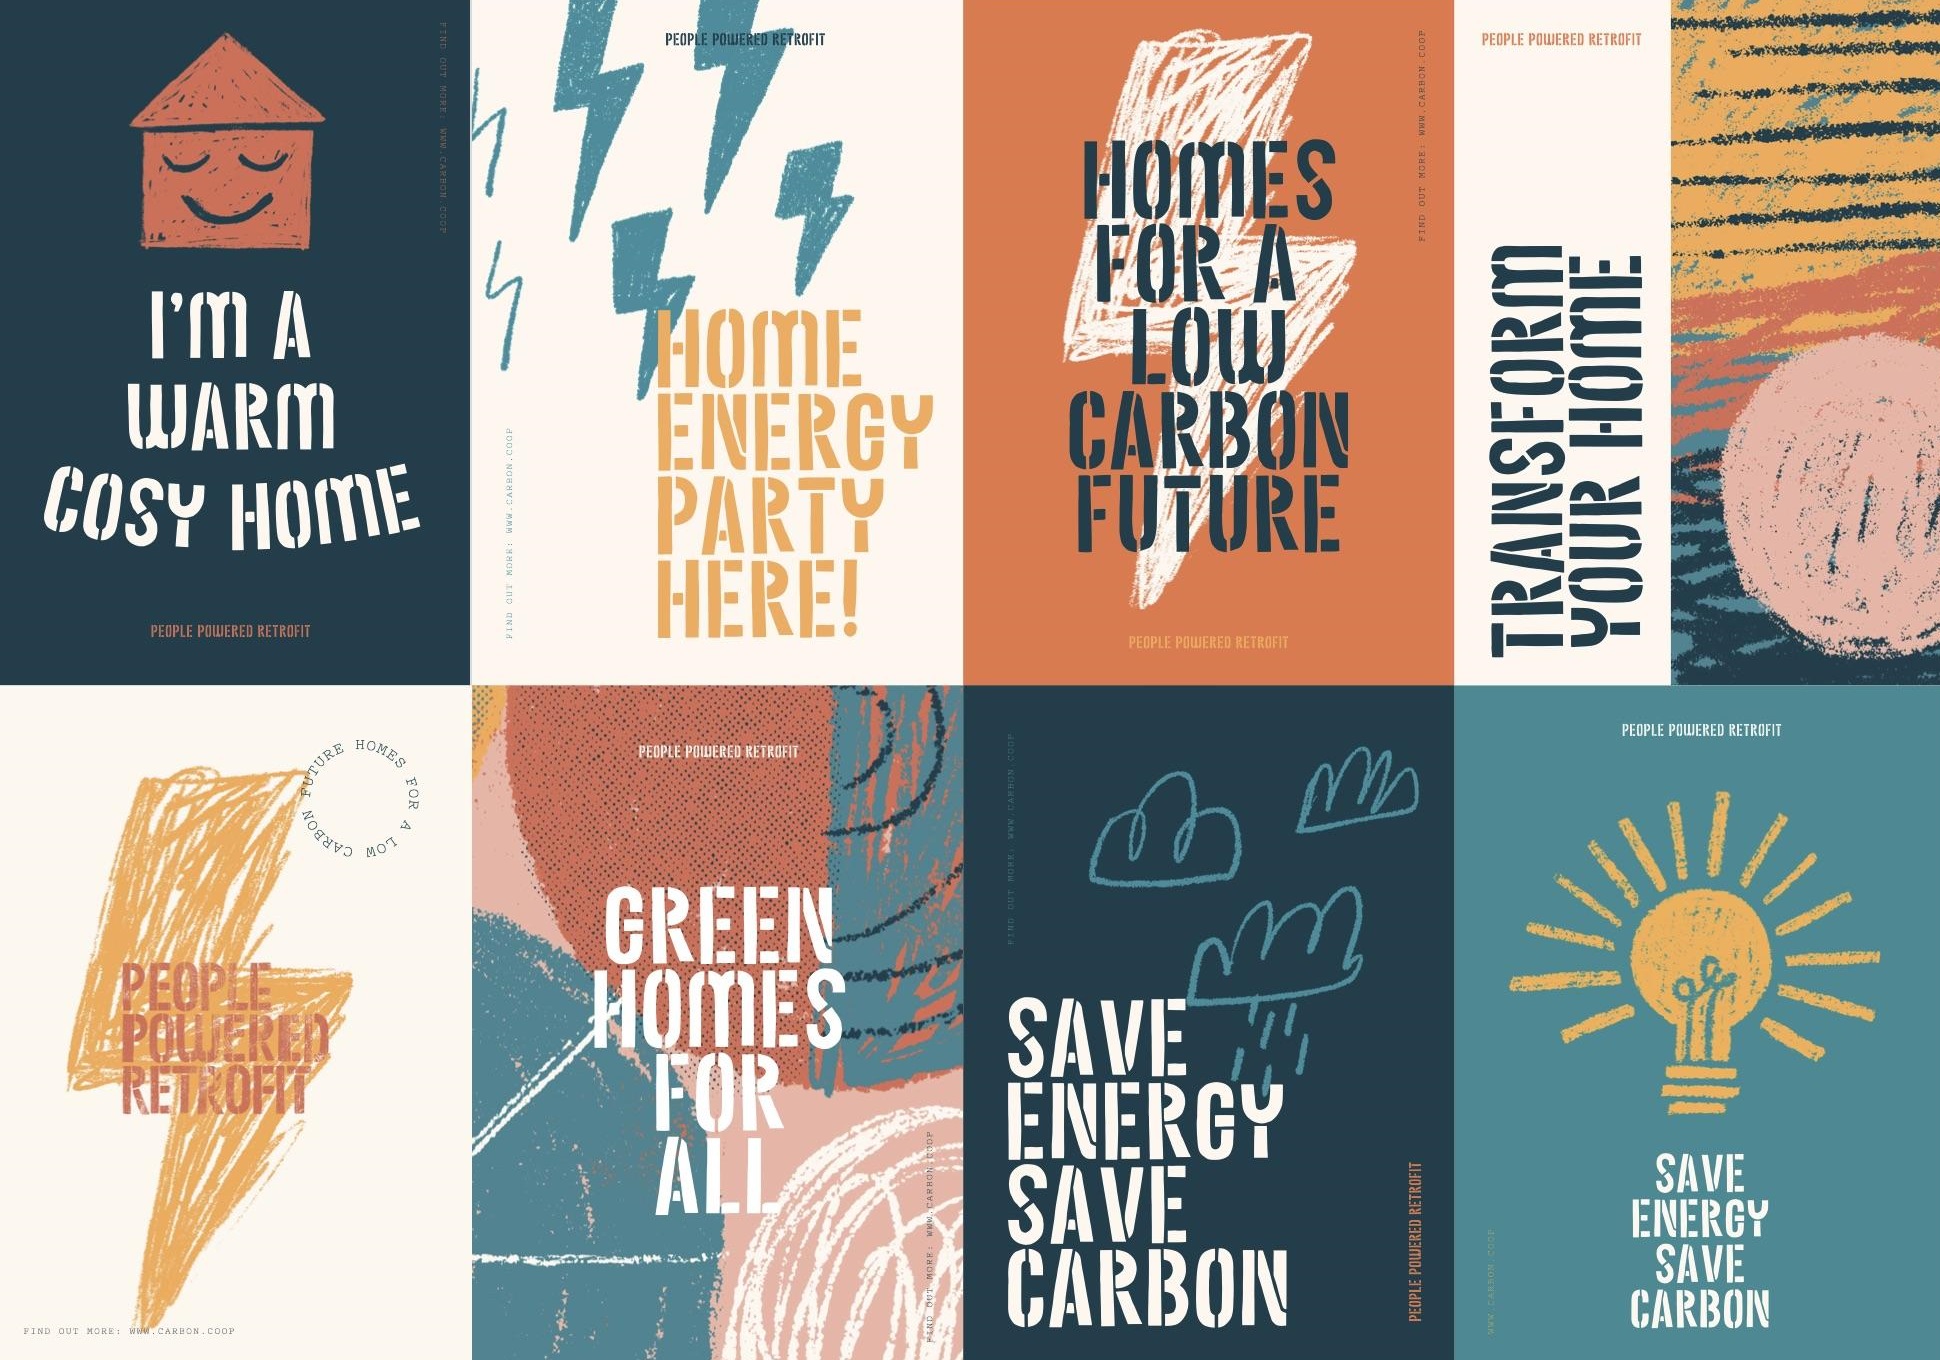 A series of People Powered Retrofit posters